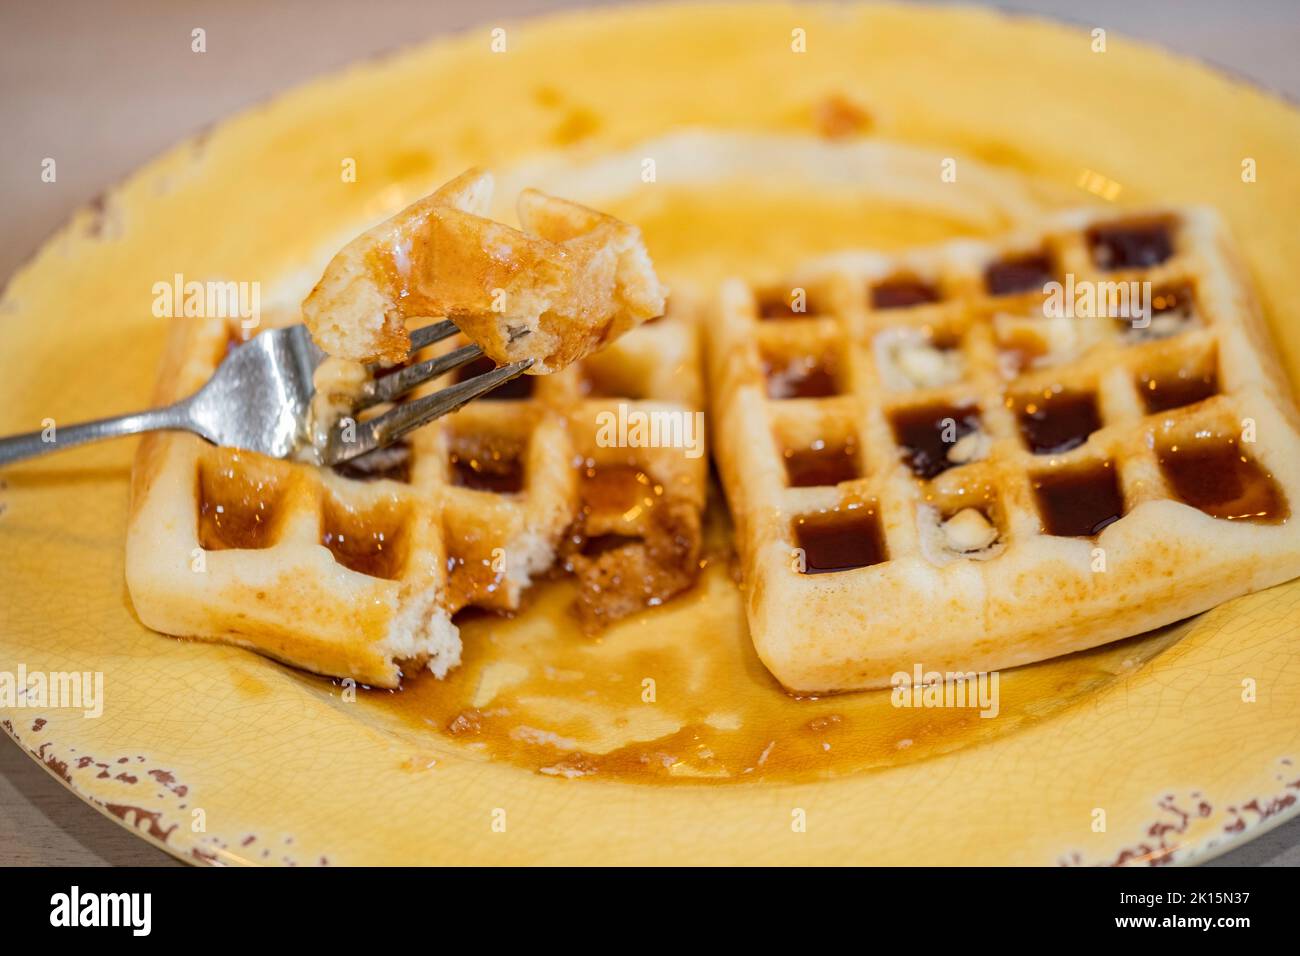 Homemade waffles smothered in maple syrup for breakfast. Yellow plate. USA. Stock Photo